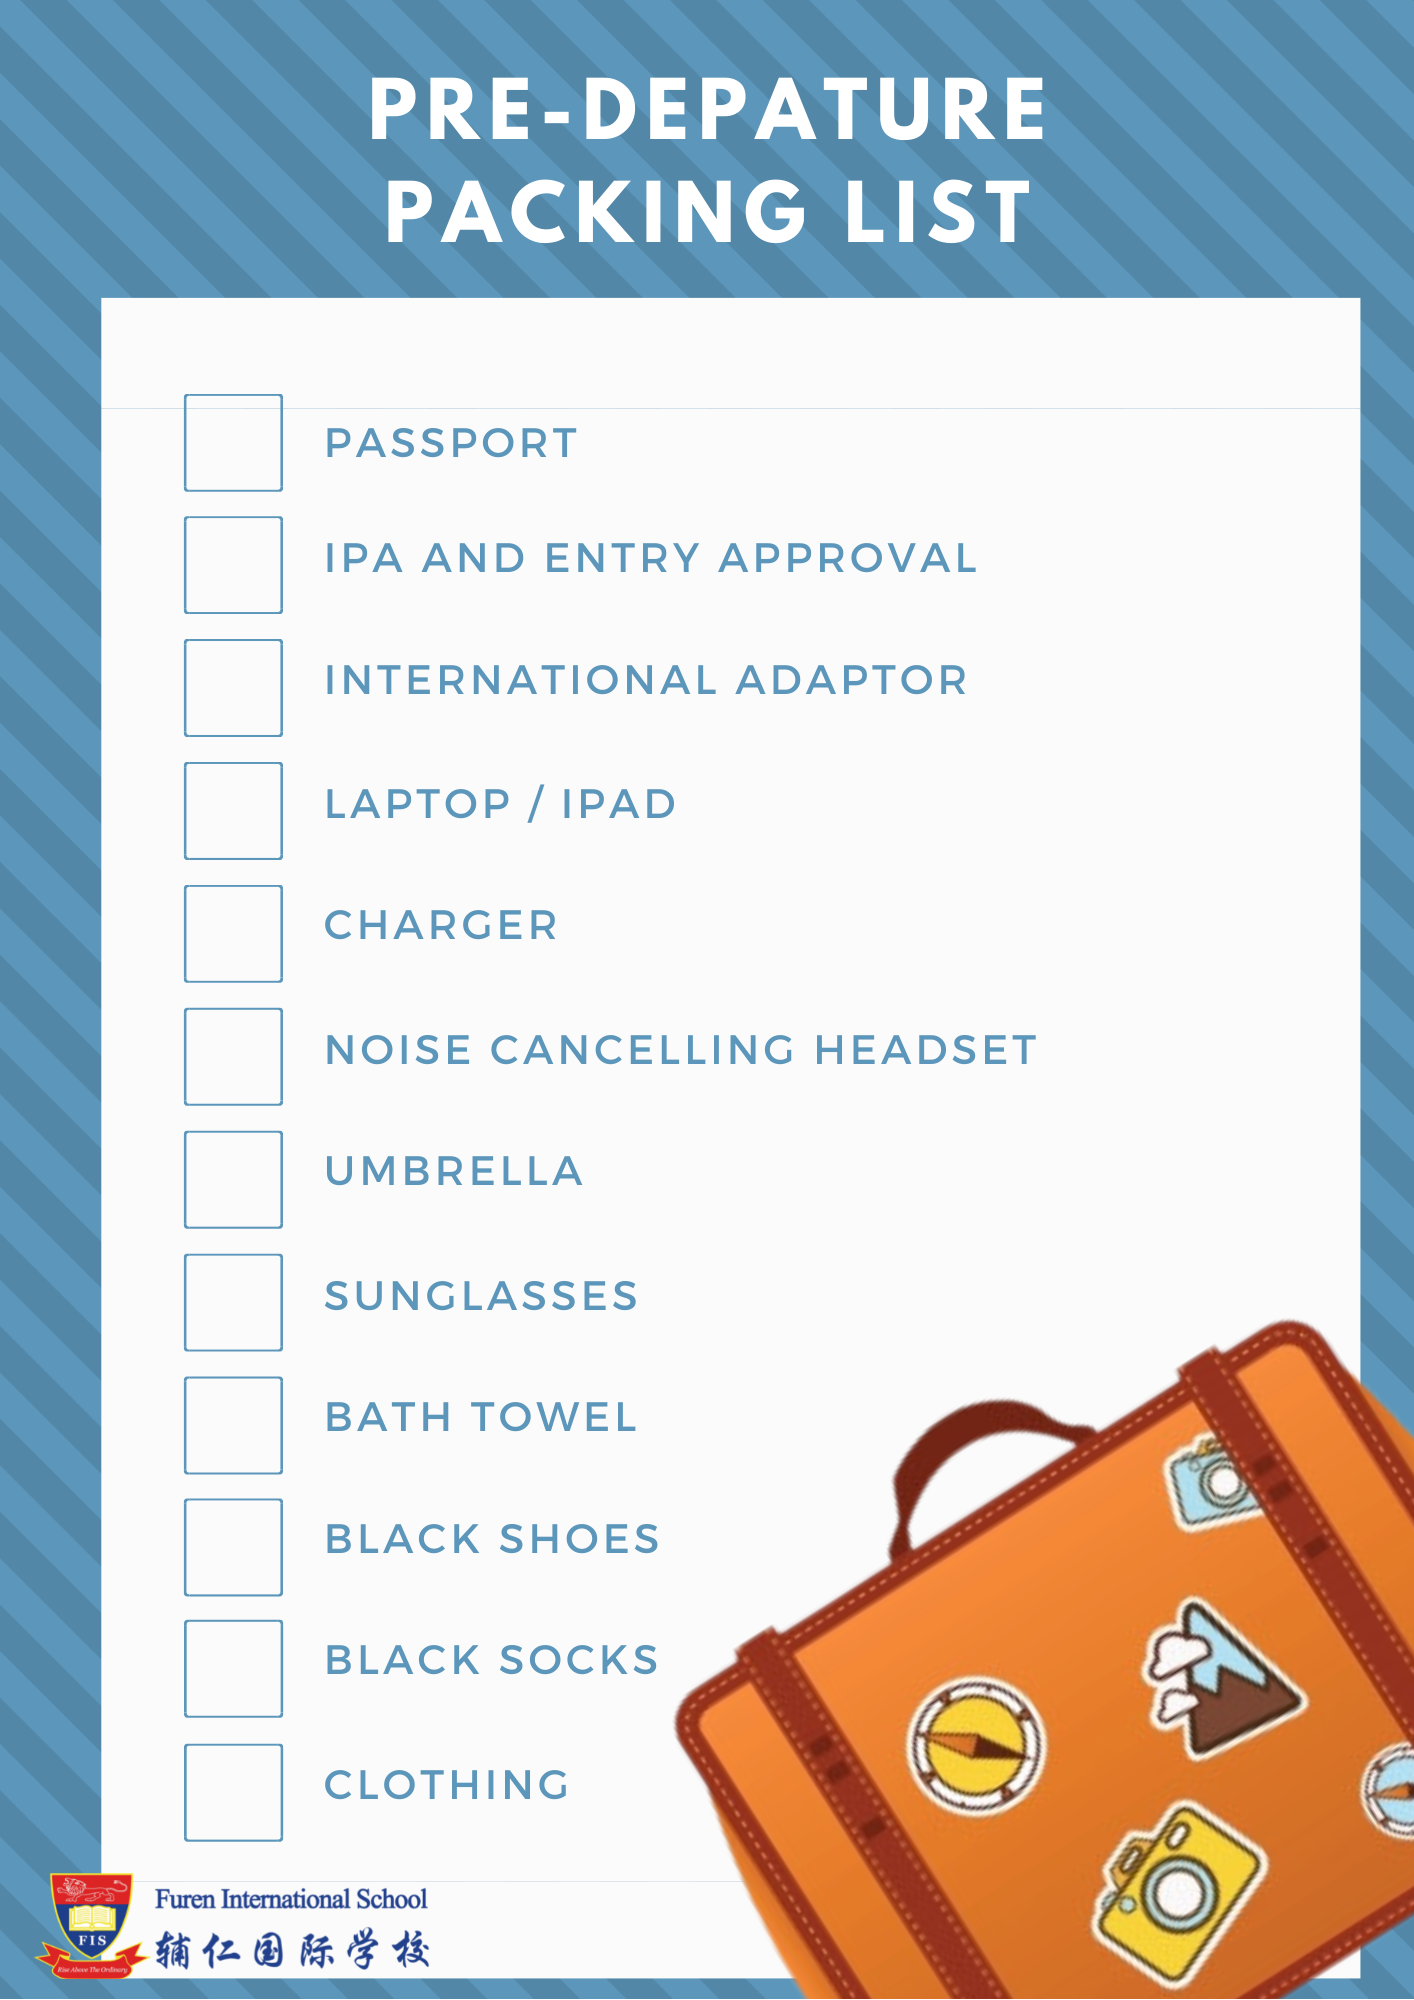 Pre-departure packing list